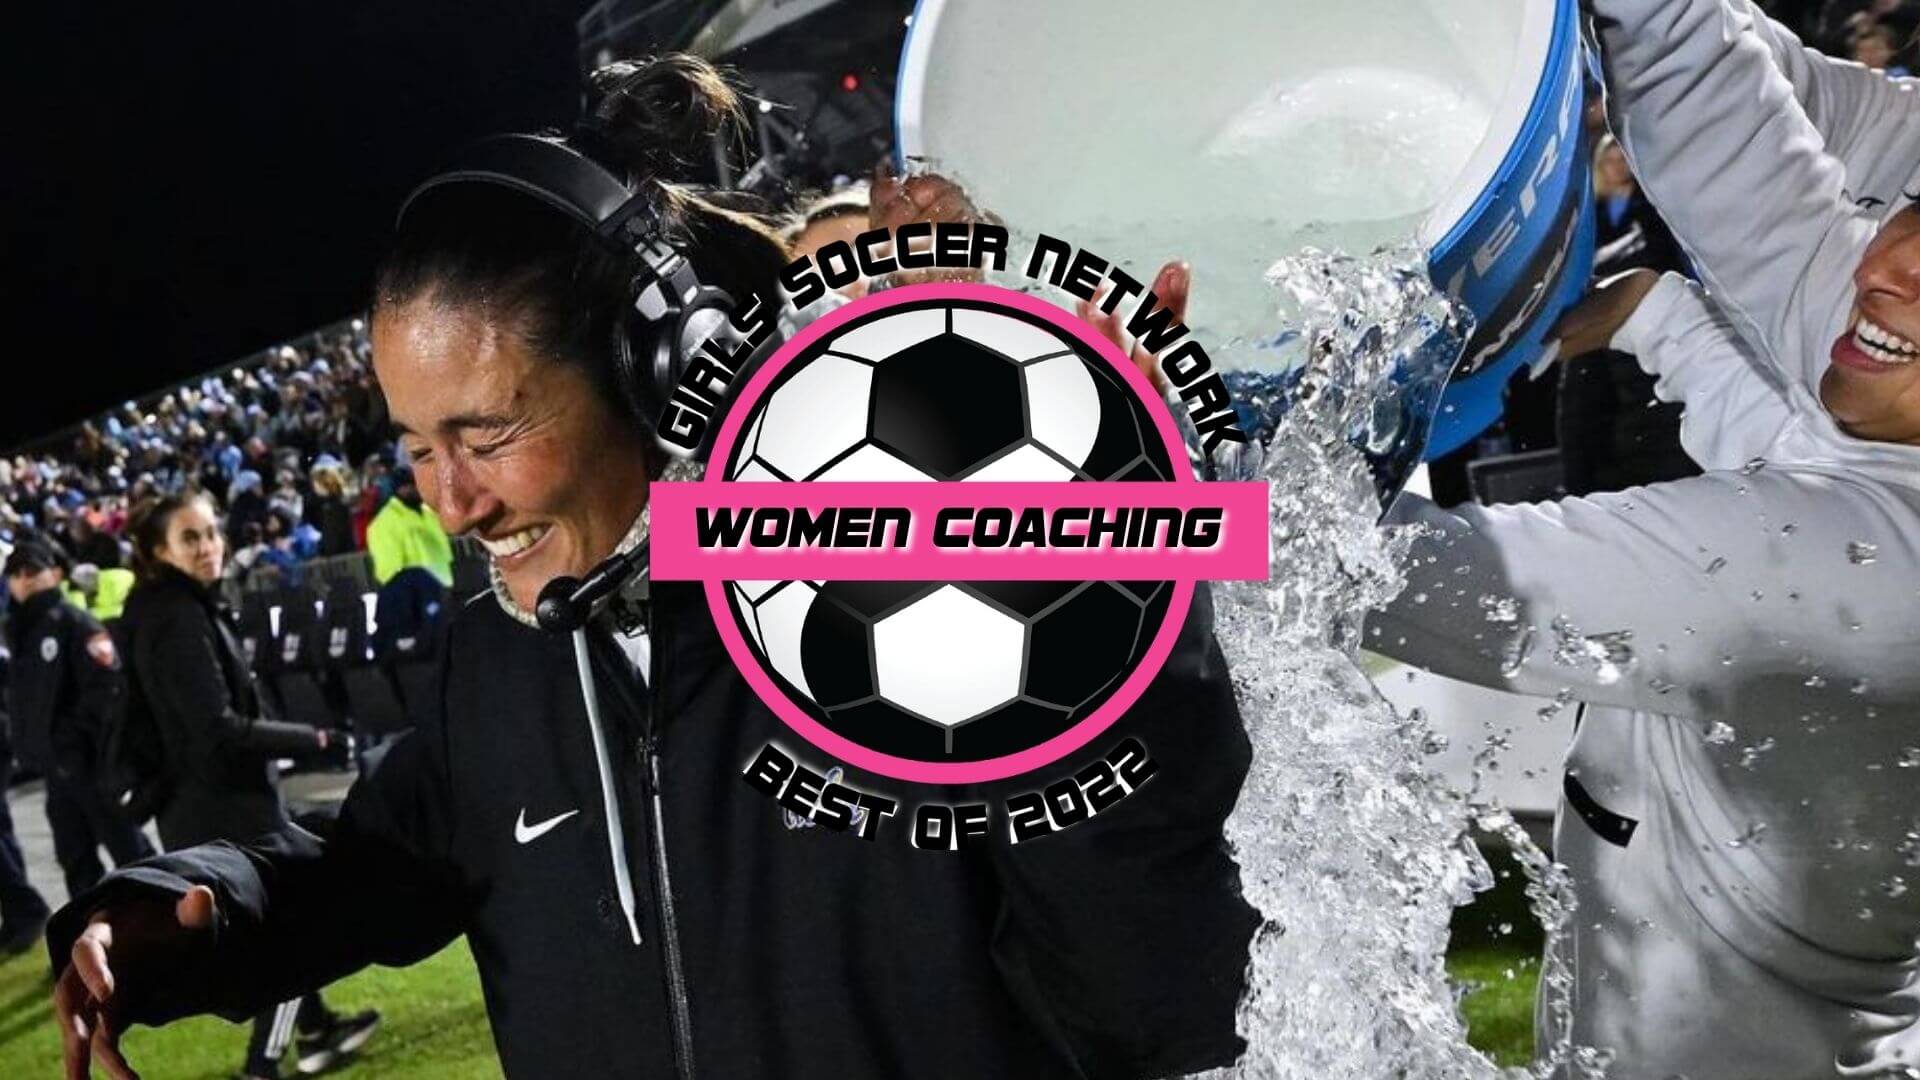 Margueritte Aozasa, one of our top women coaching college soccer this year